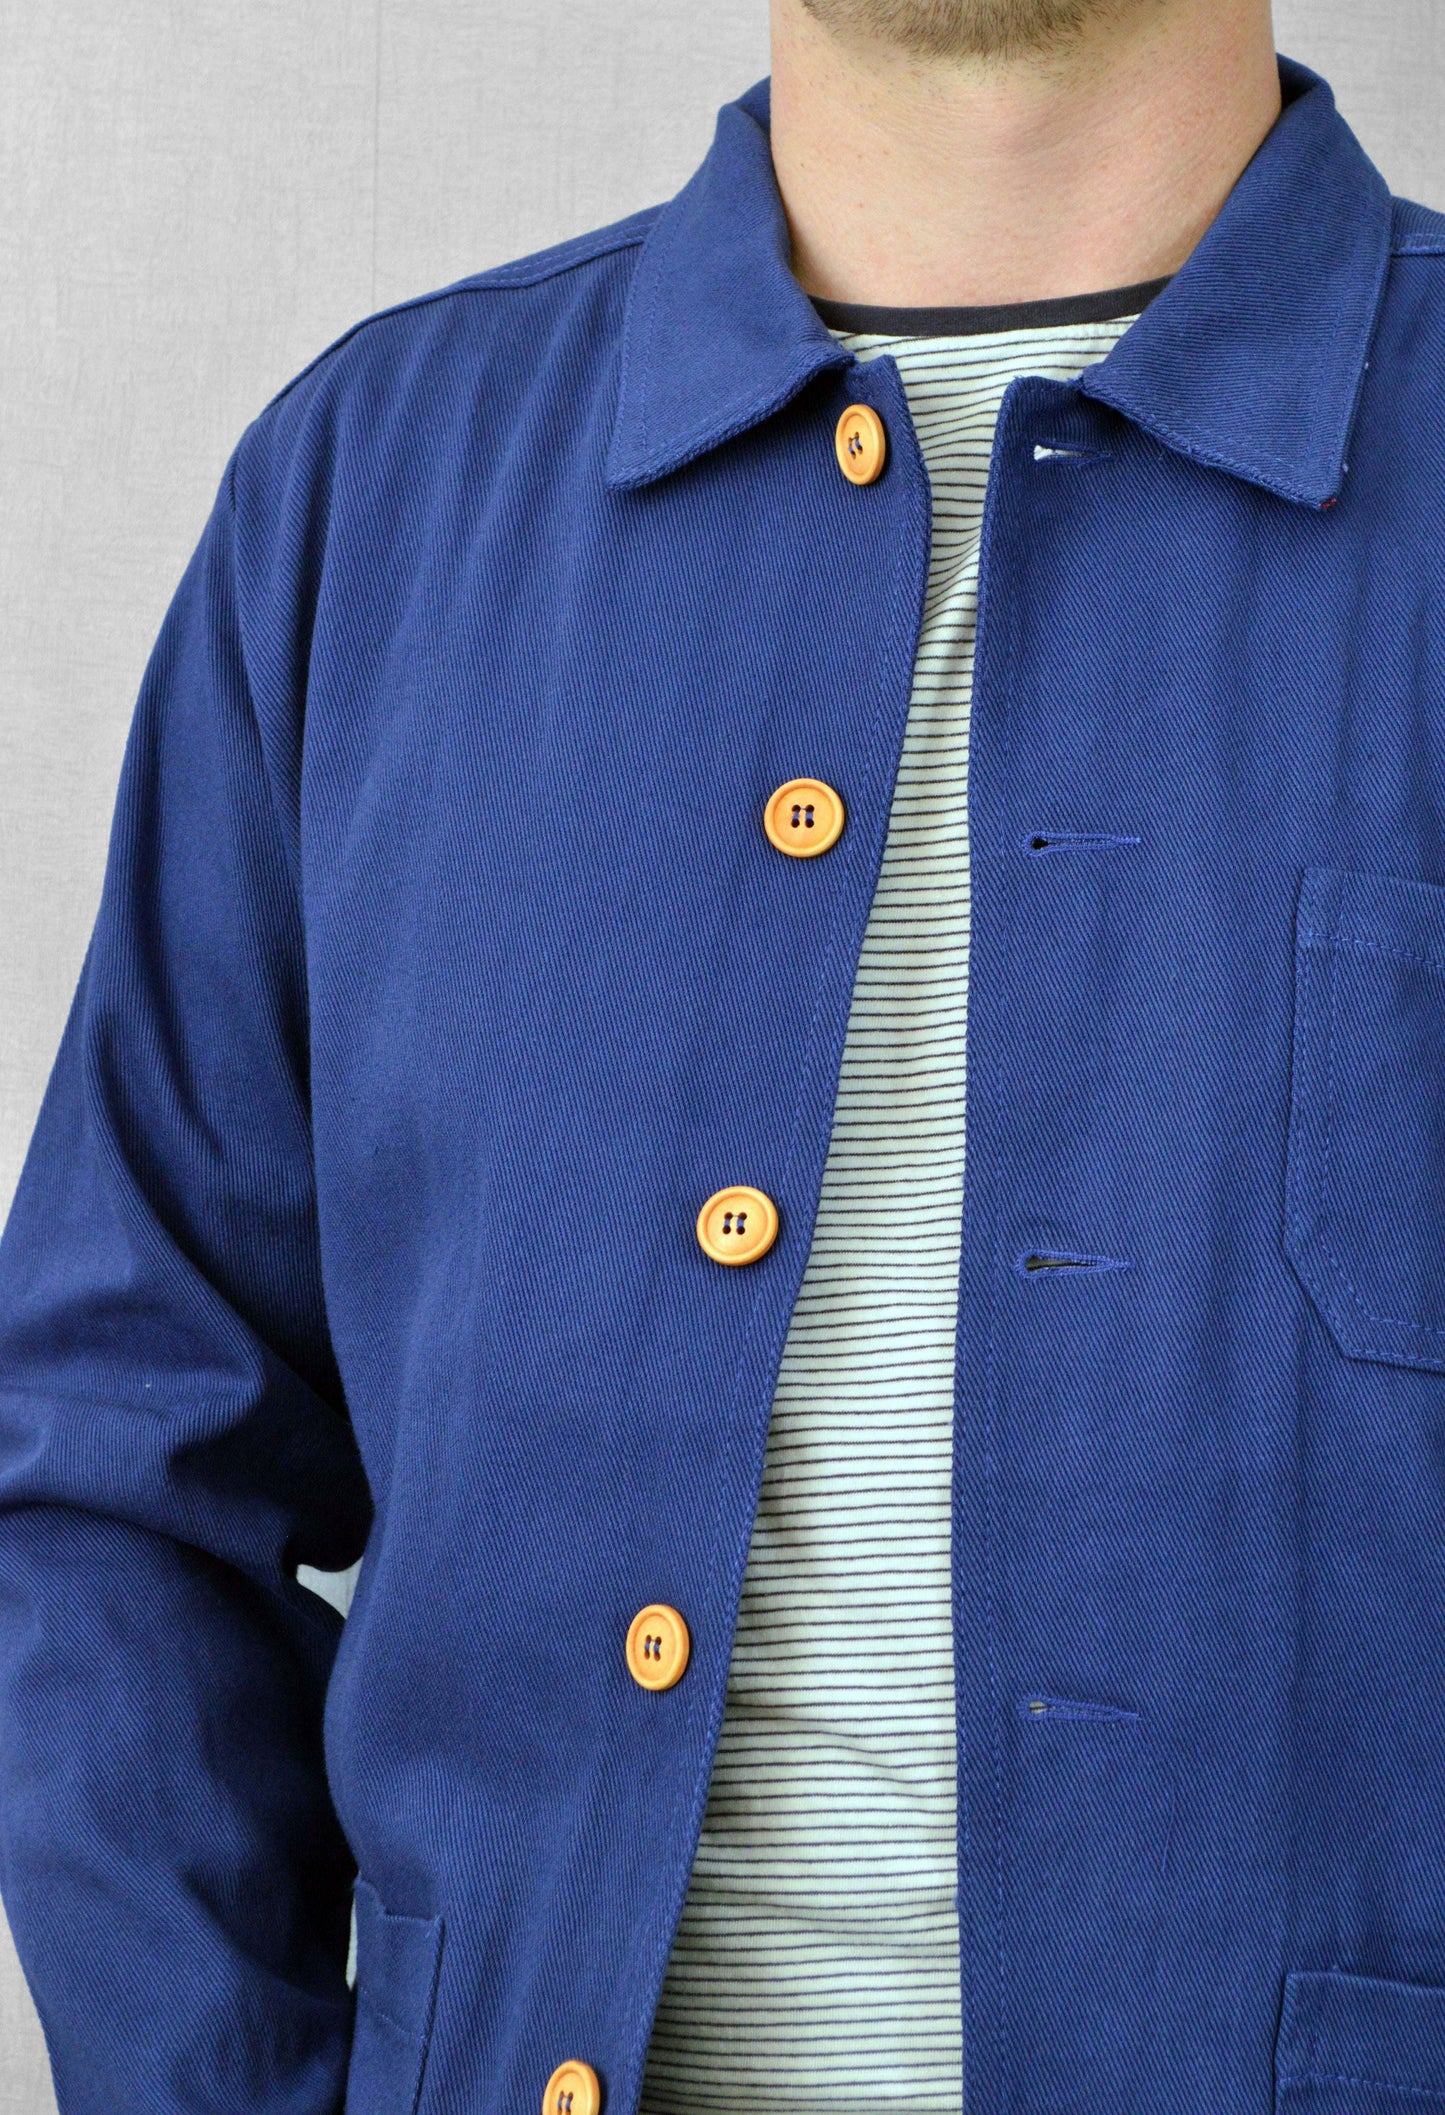 French Chore Jacket Indigo Wooden Buttons